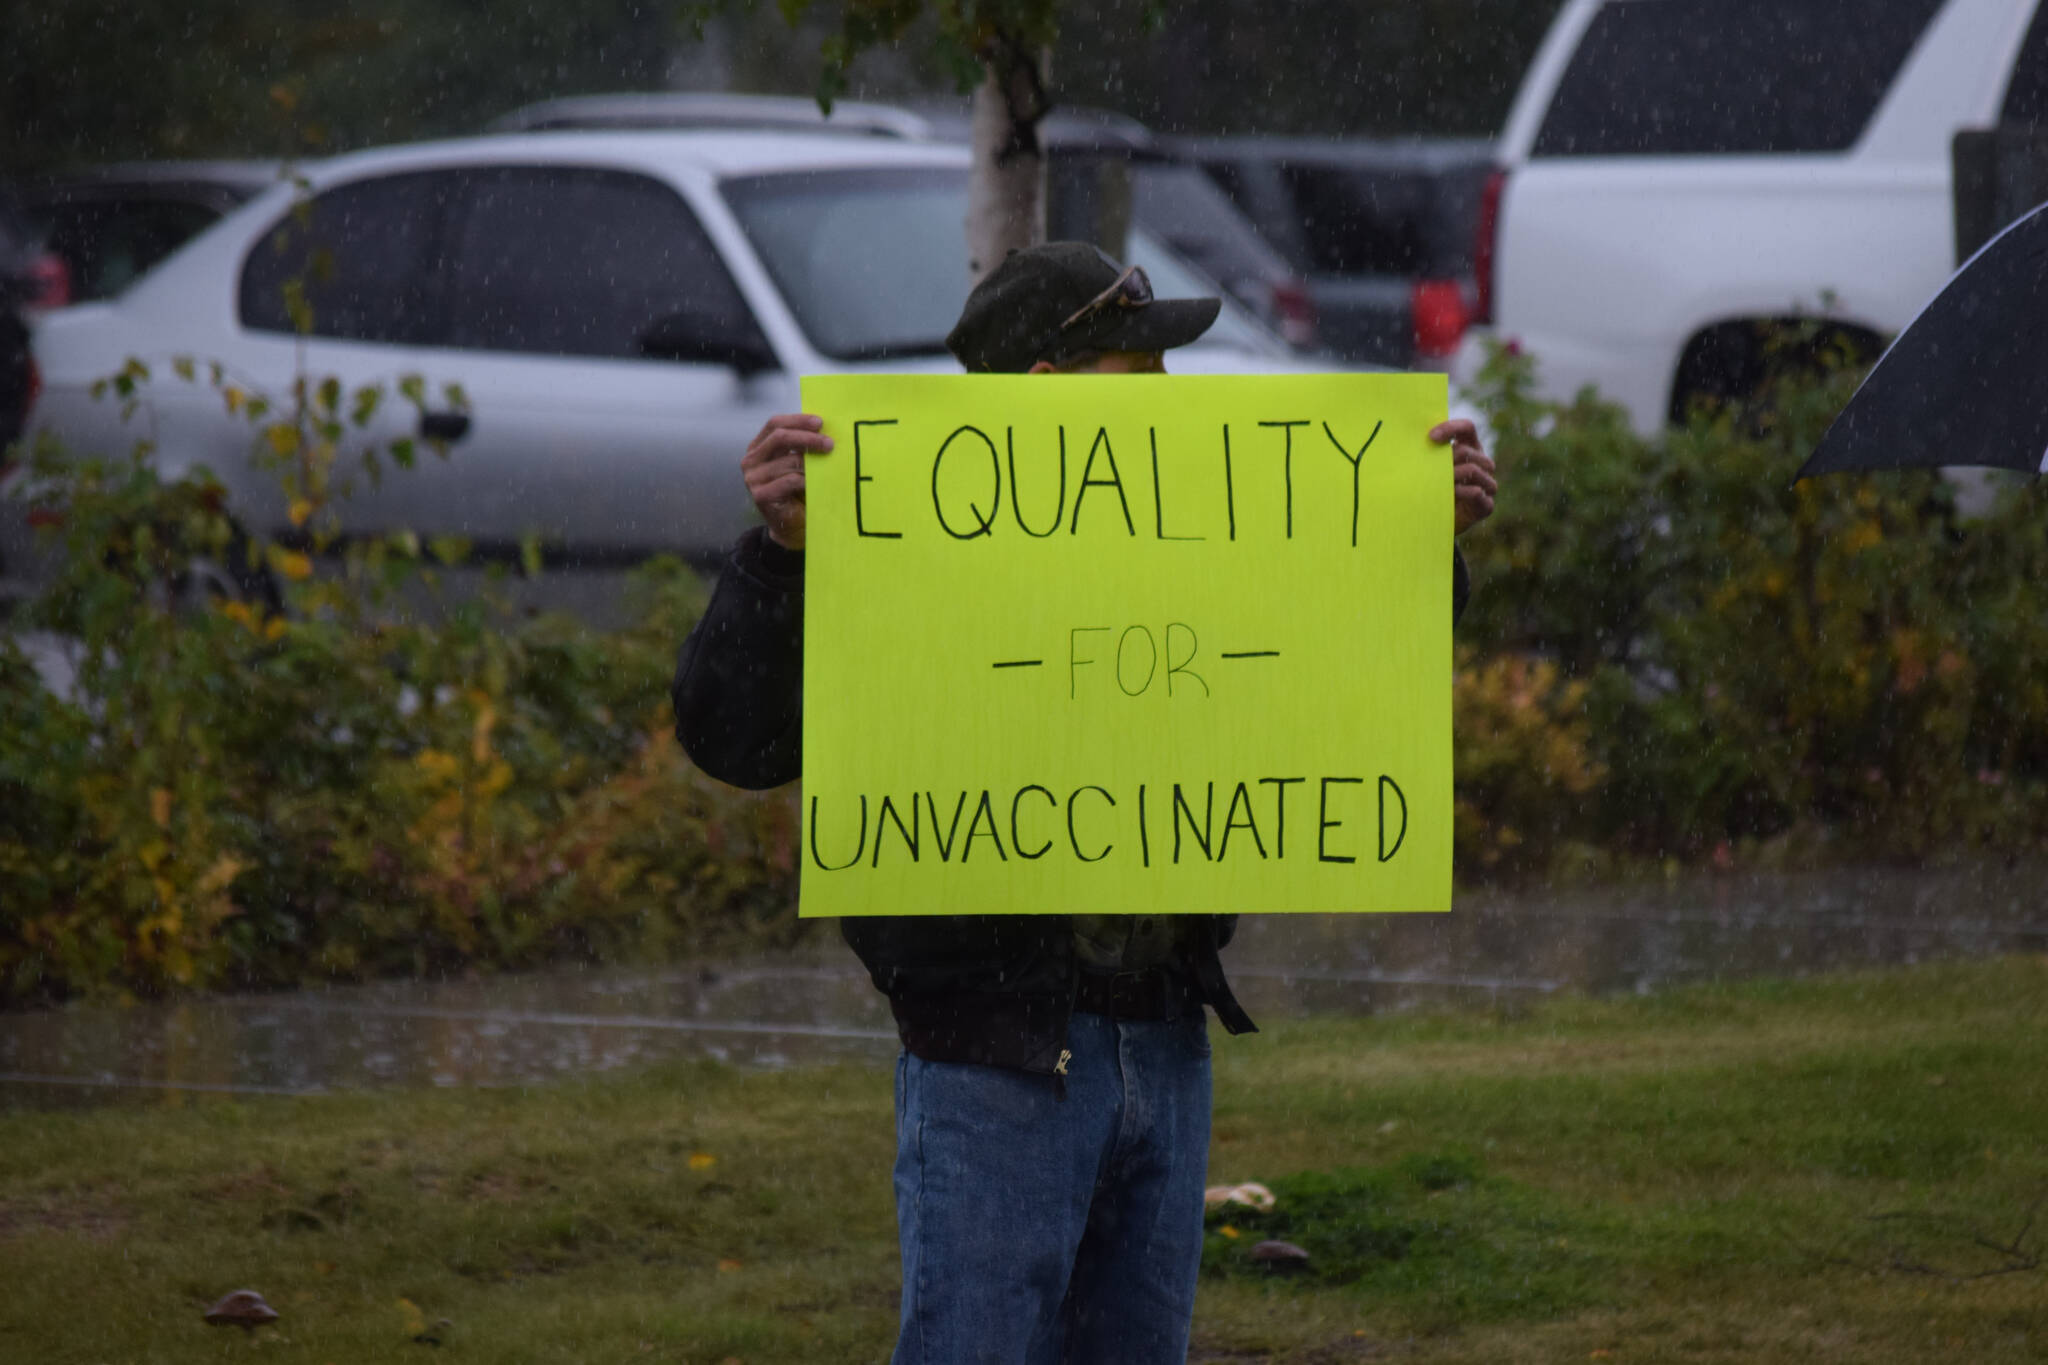 A protester stands outside the George A. Navarre Borough Admin building in Soldotna on Tuesday, Sept. 14, 2021. (Camille Botello/Peninsula Clarion)